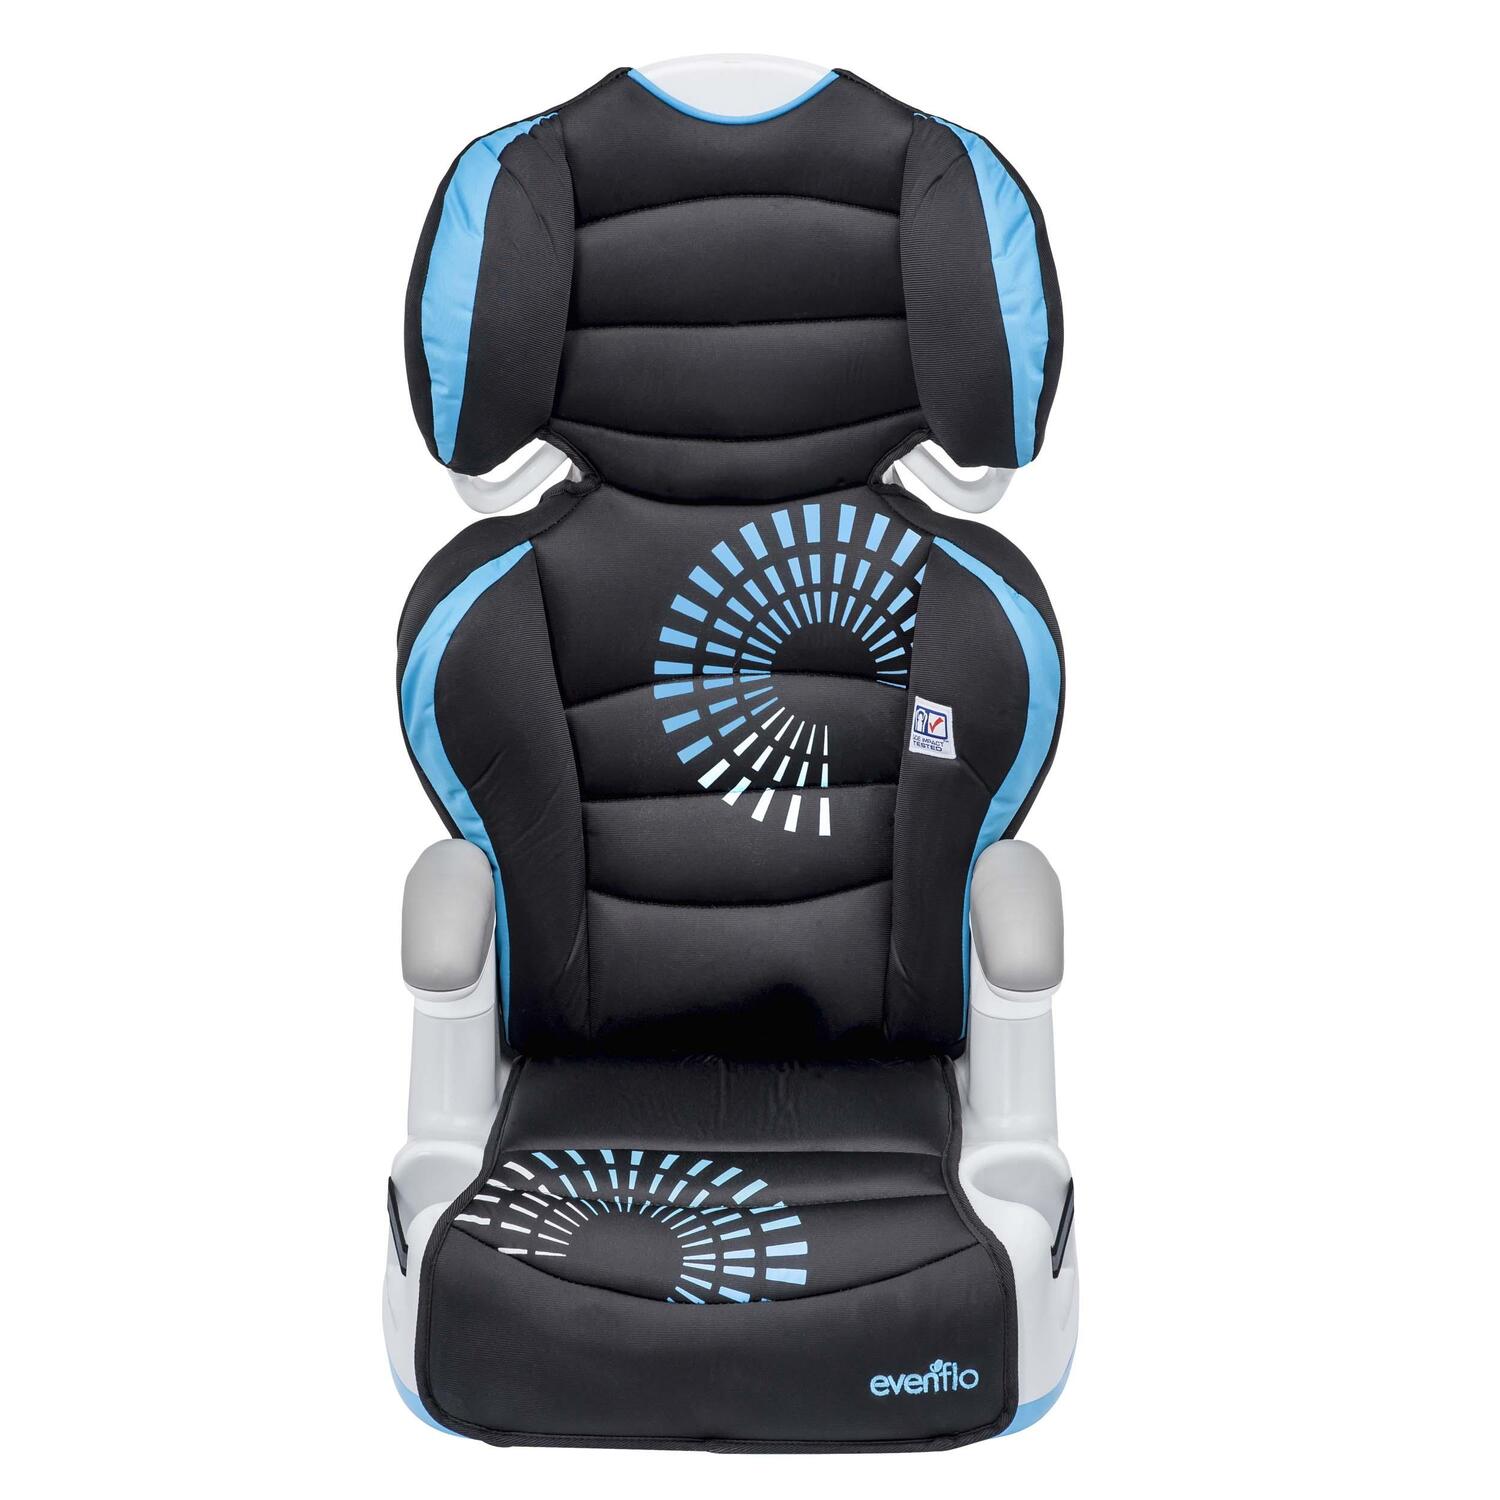 Evenflo Big Kid LX High Back Booster Car Seat, Carrissa - image 3 of 5